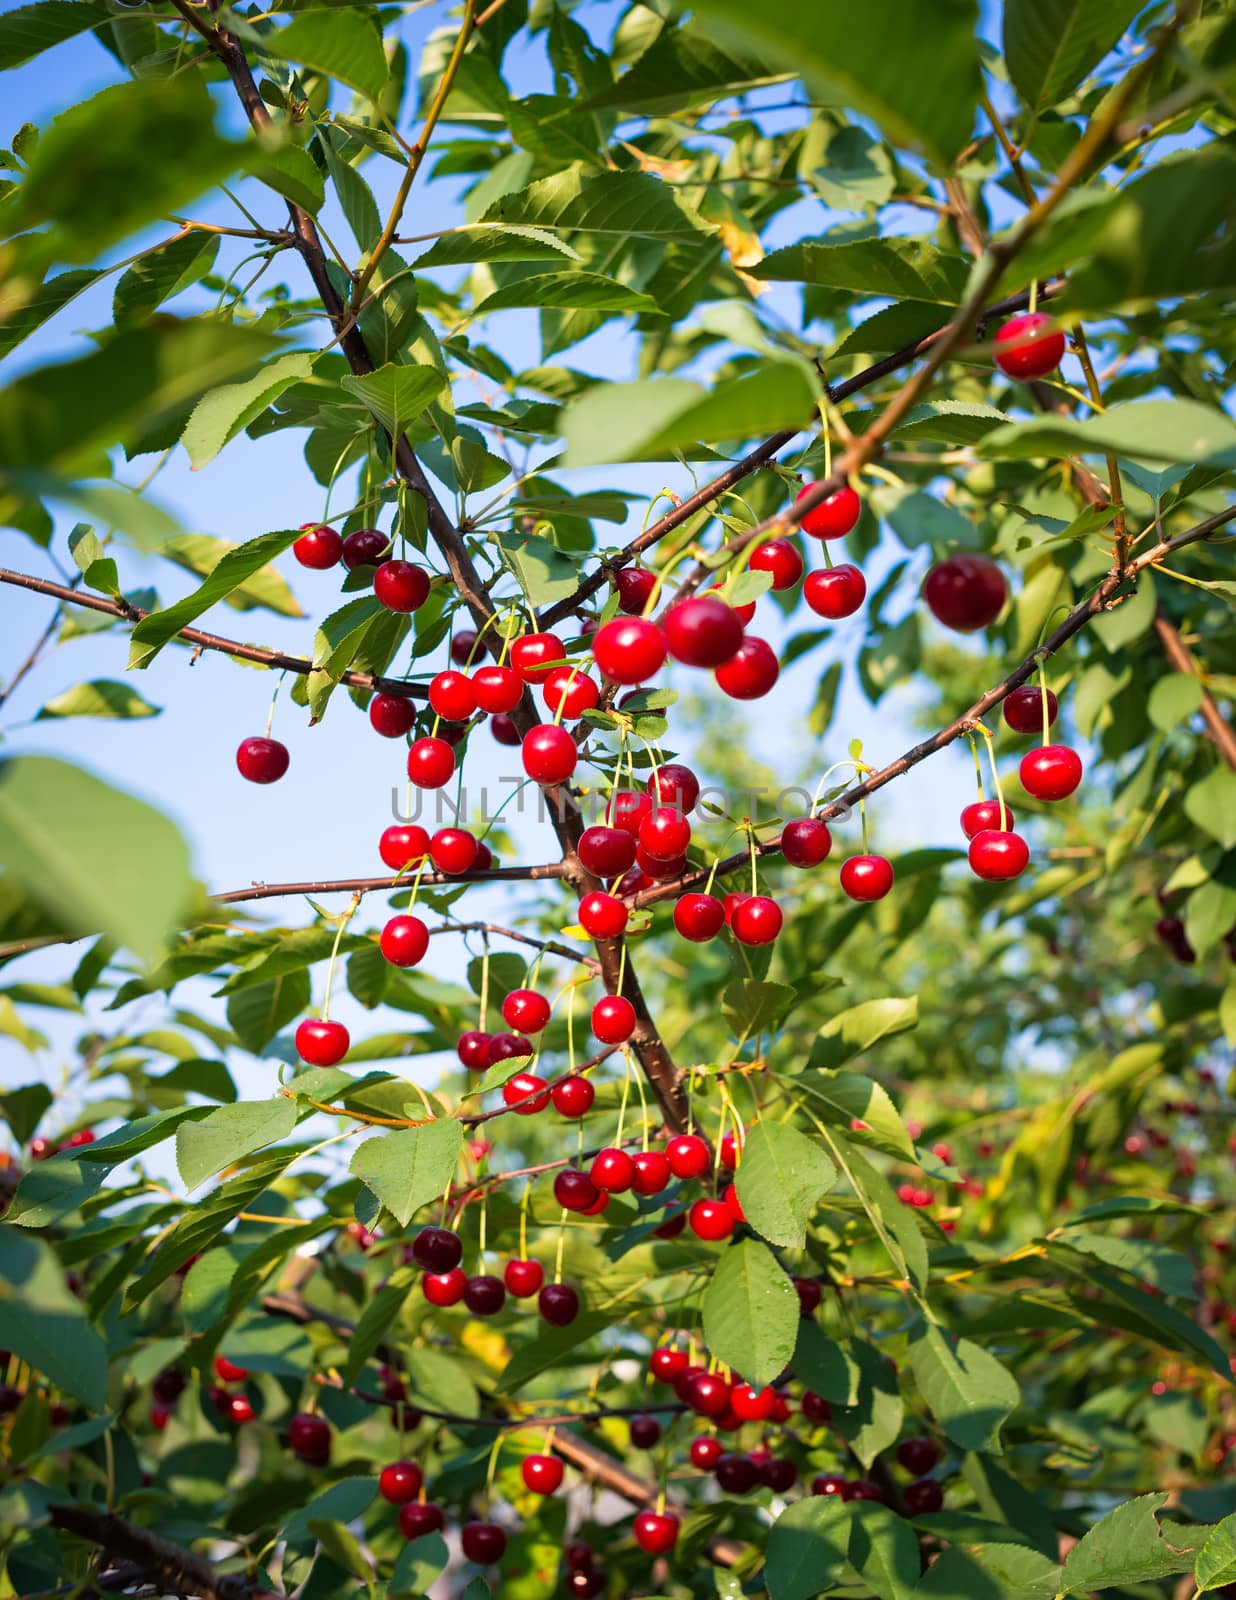 Sweet cherries hanging on the cherry tree branch by Draw05